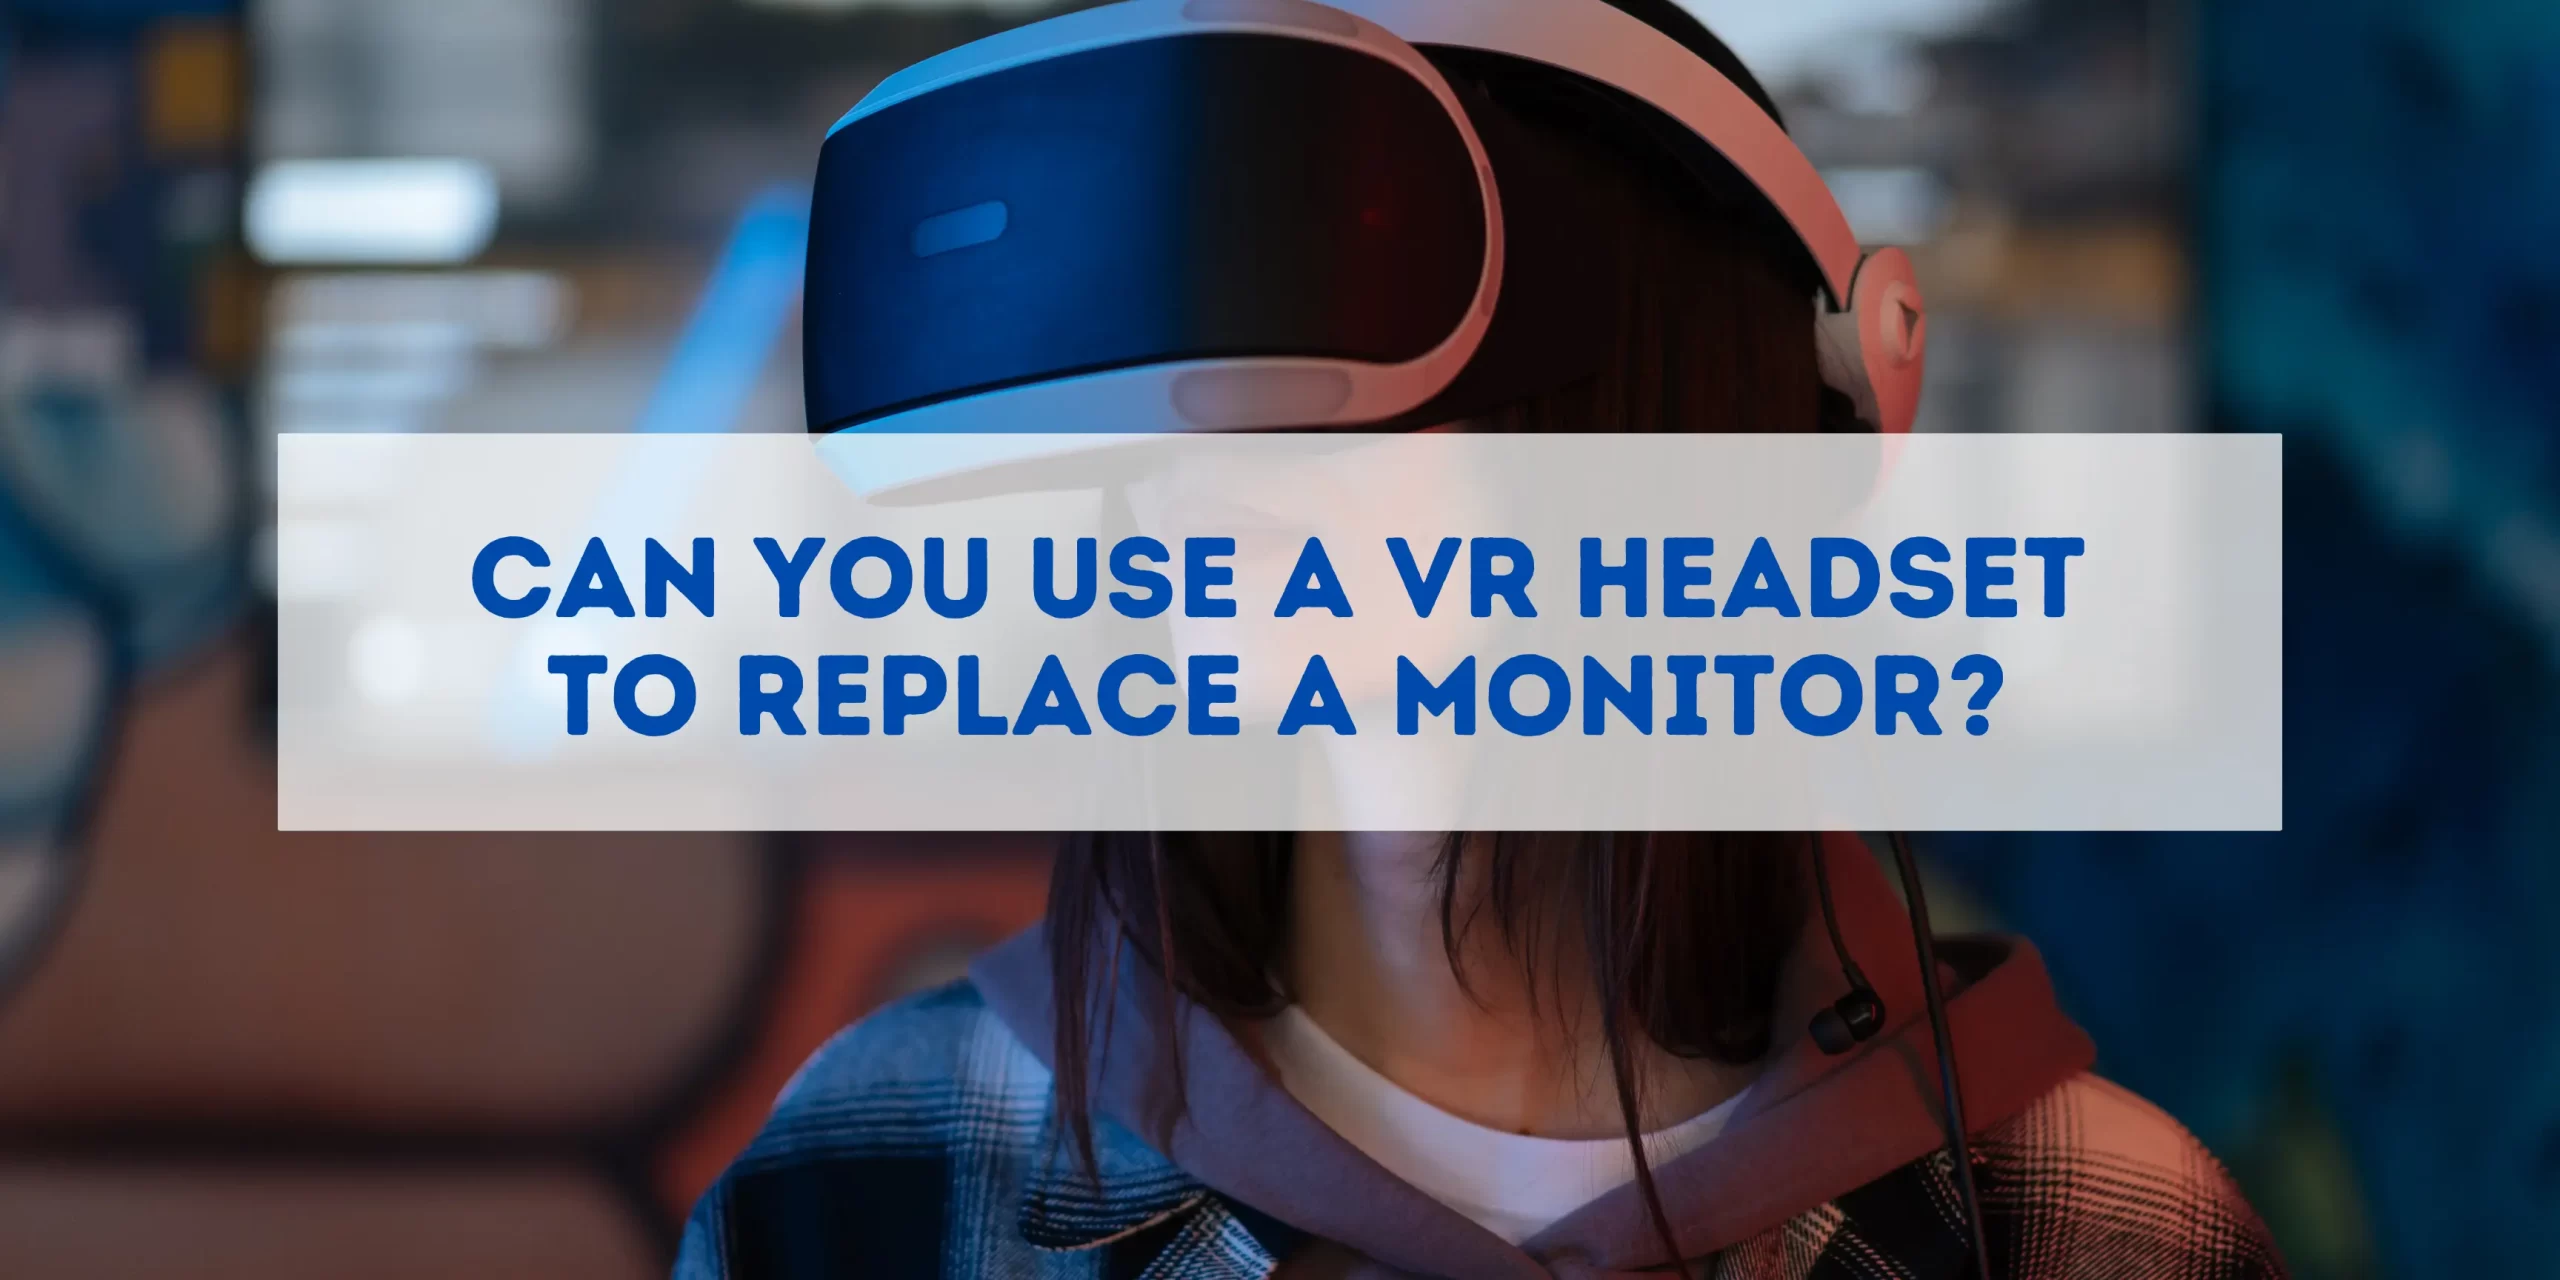 vr headset as monitor